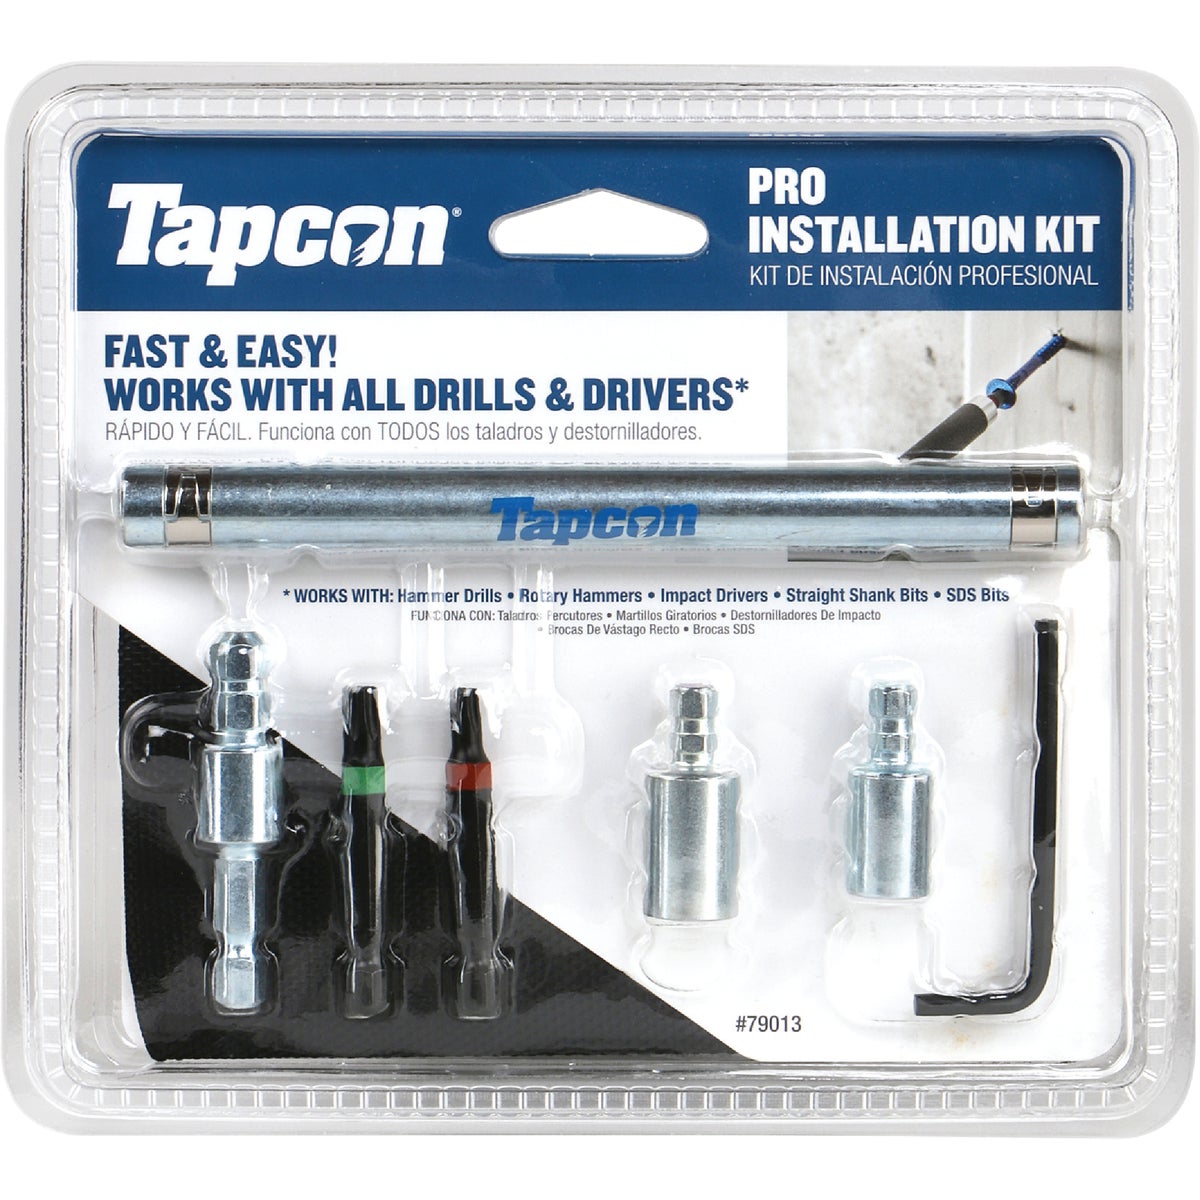 Item 762397, Get the job done right the first every time with the Tapcon Pro 